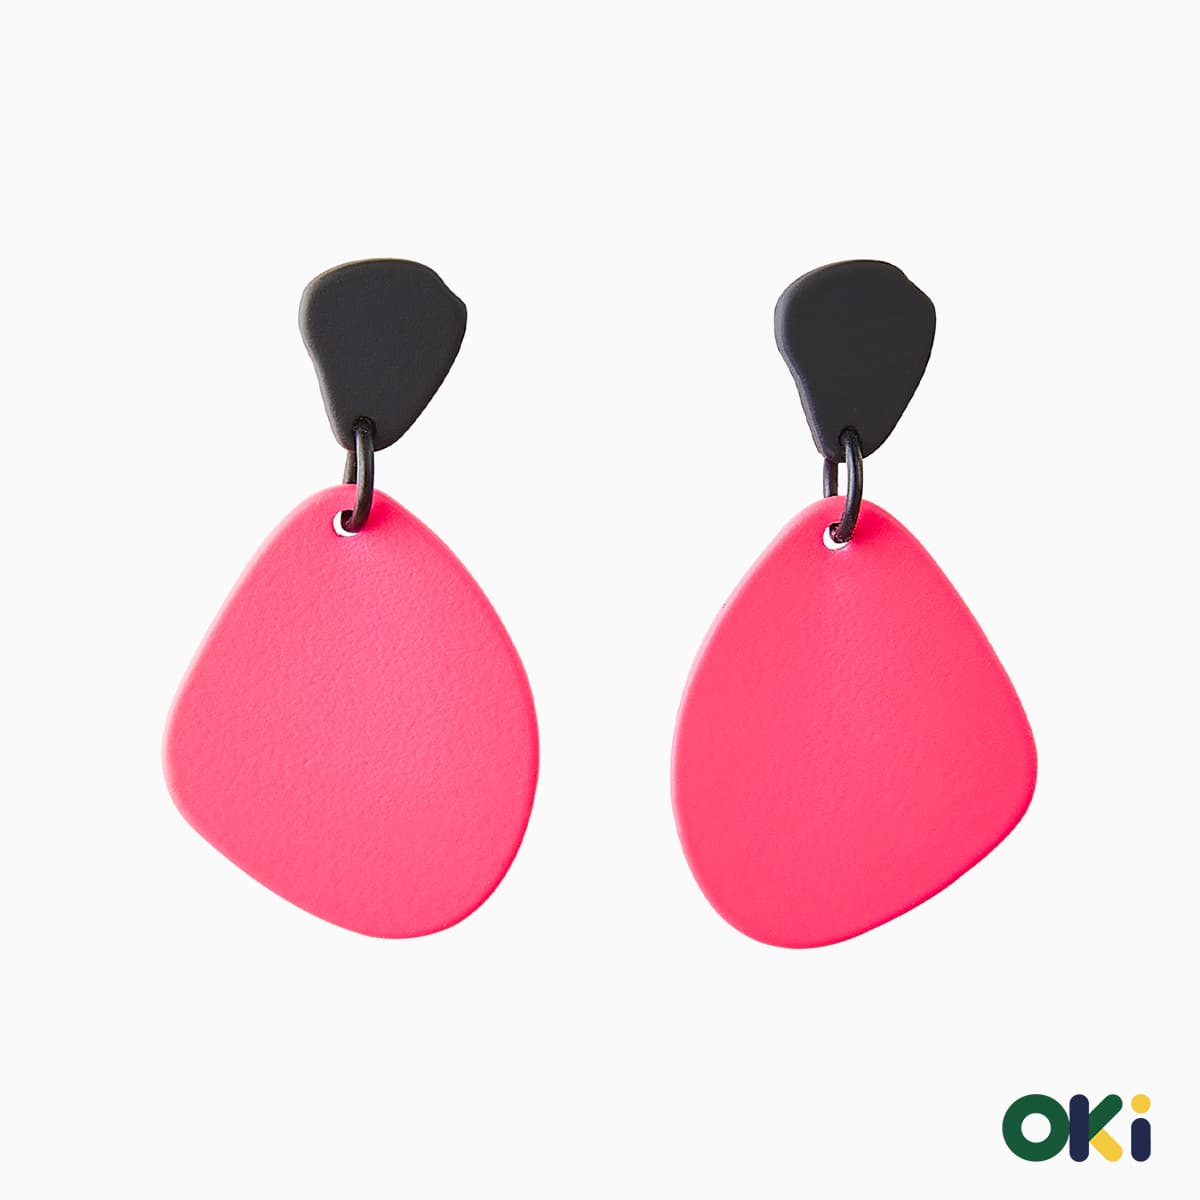 Blush earrings OKi Fashion accessories jewely hypoallergenic